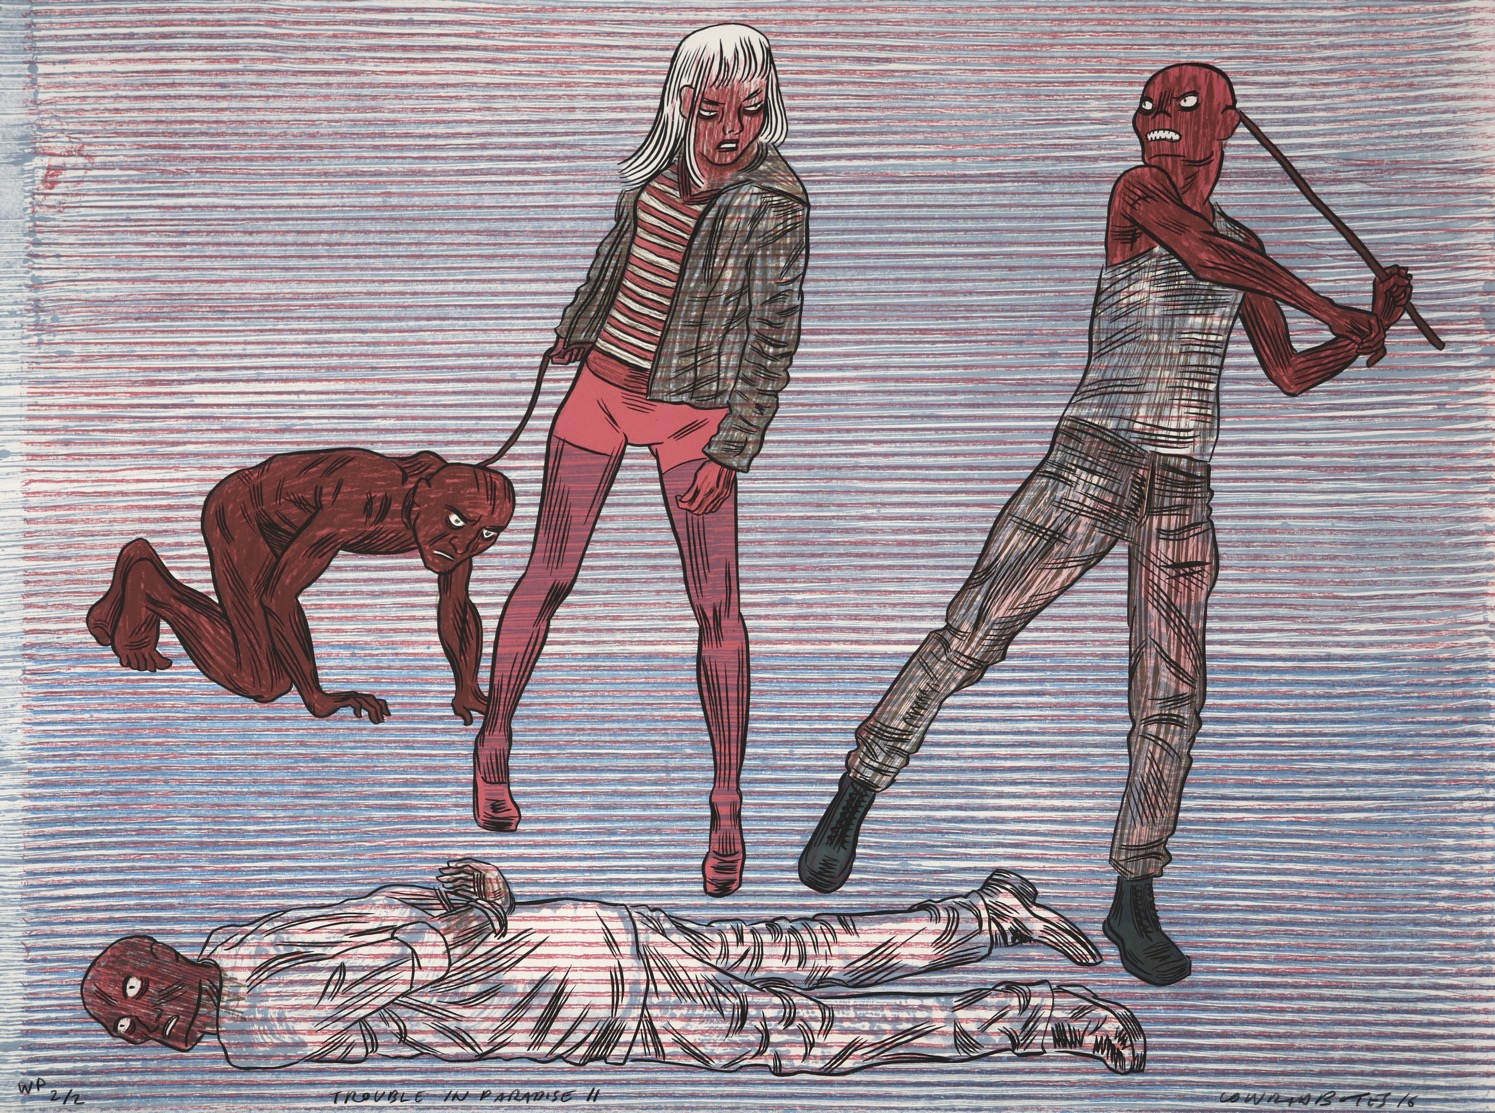 Four zombie-like human figures drawn in a comic style interacting with a striped background